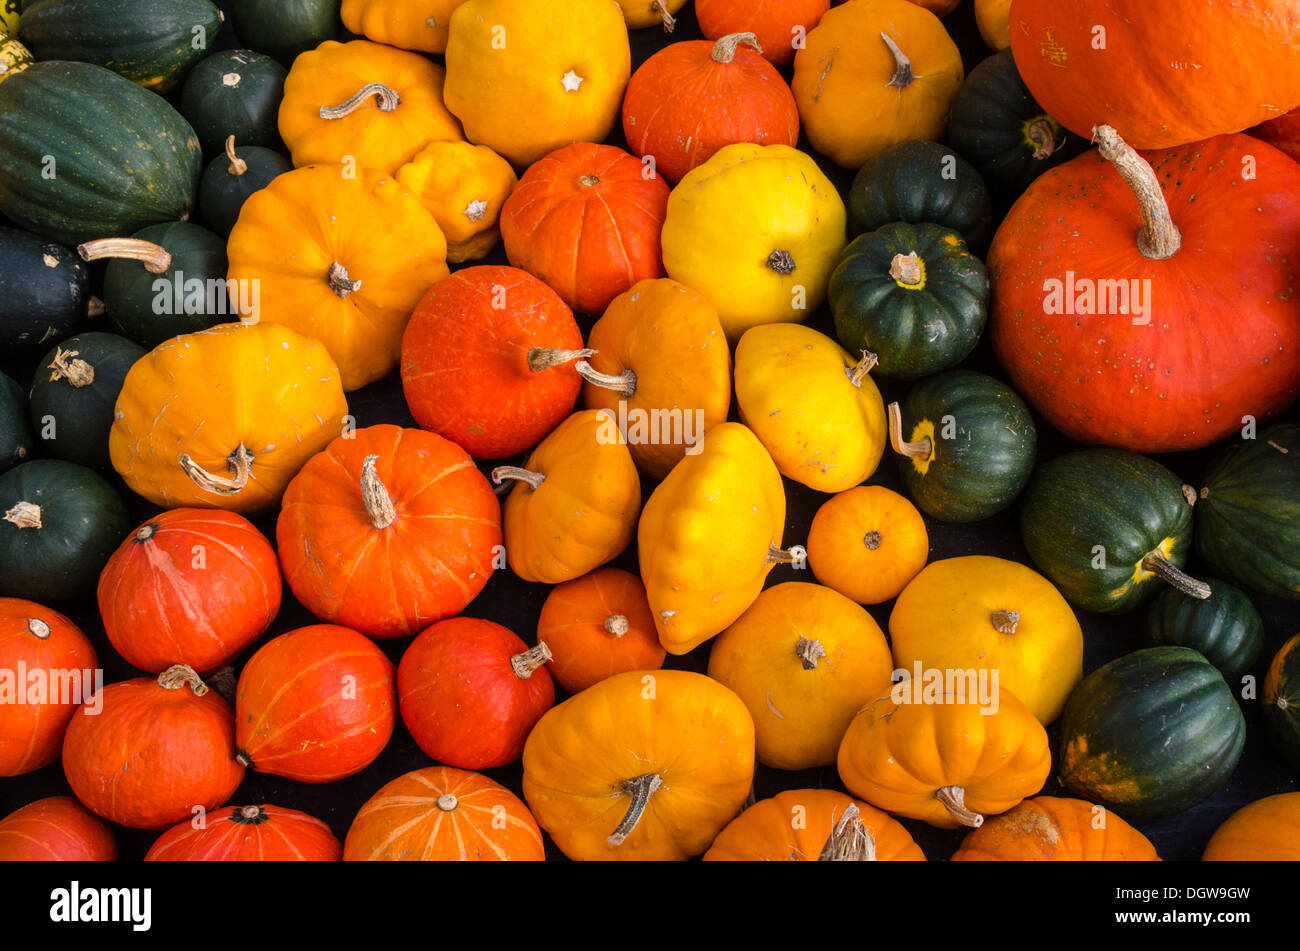 Pumpkins a selection of different varieties Stock Photo